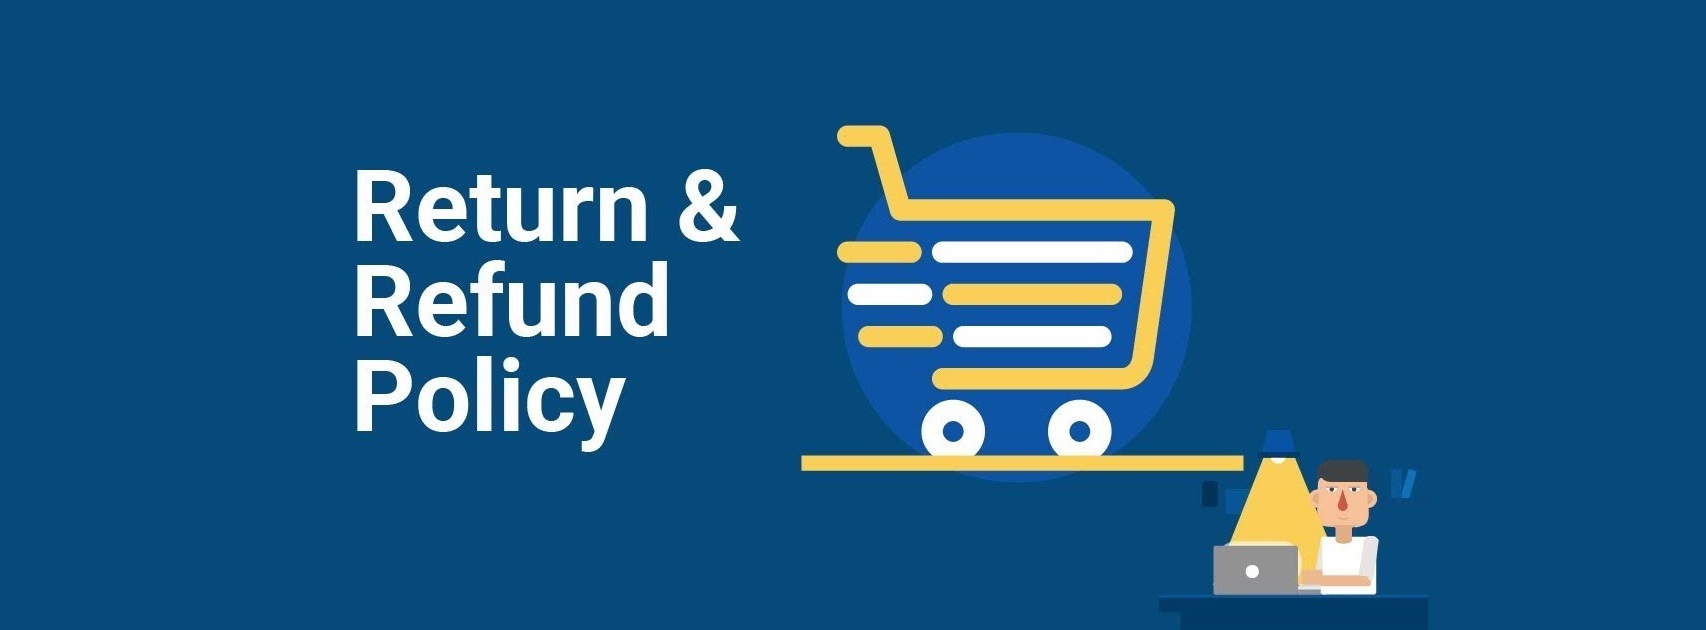 Return and Refund Policies in E-Commerce: A How To Guide